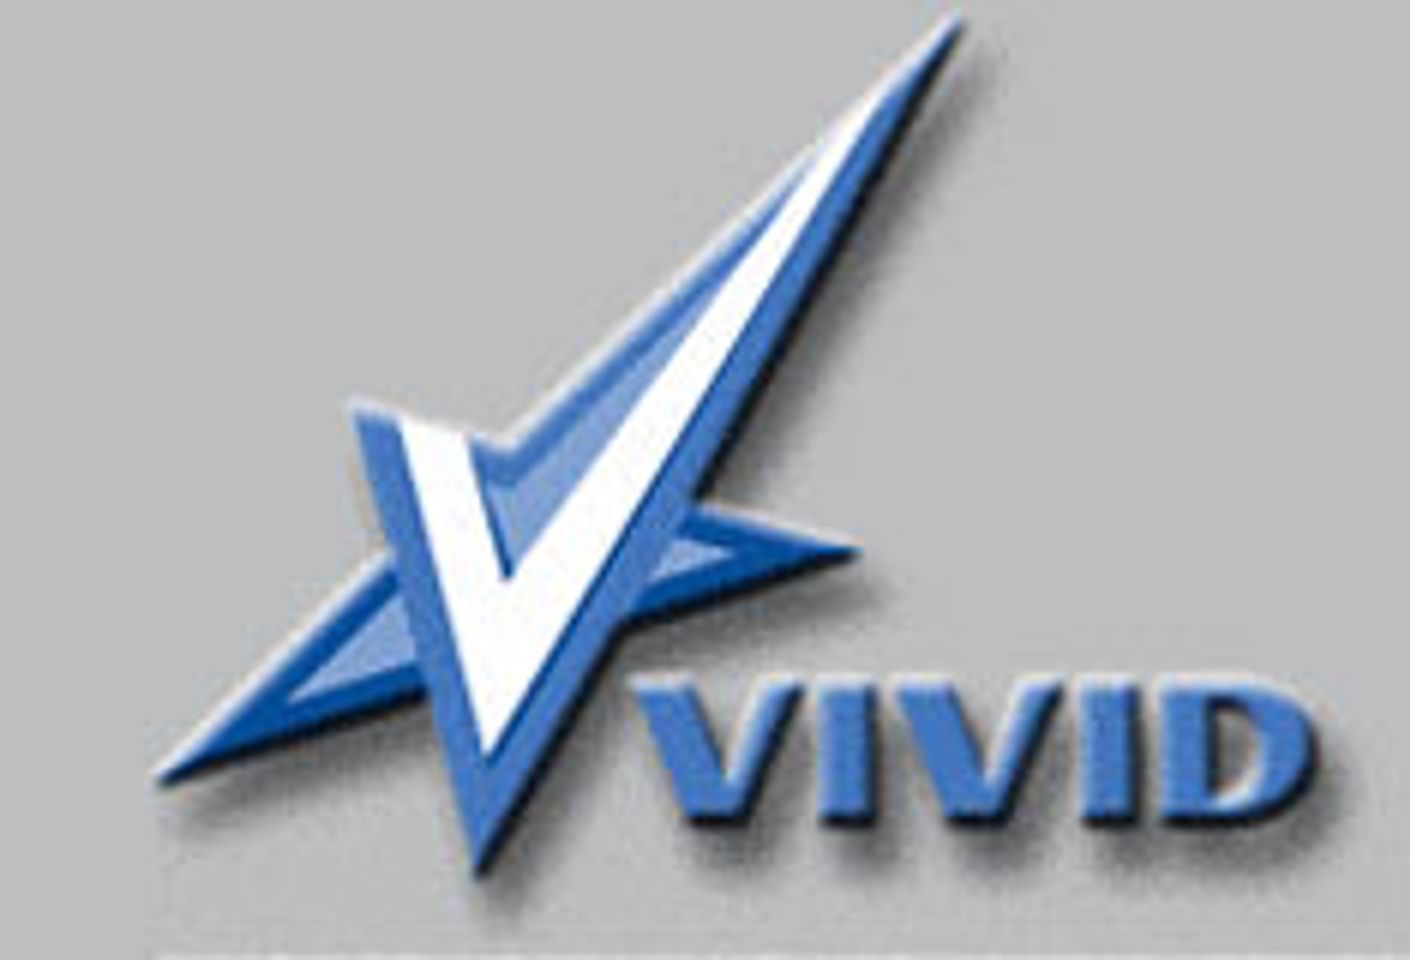 Vivid Suggests Combo Packs For Christmas